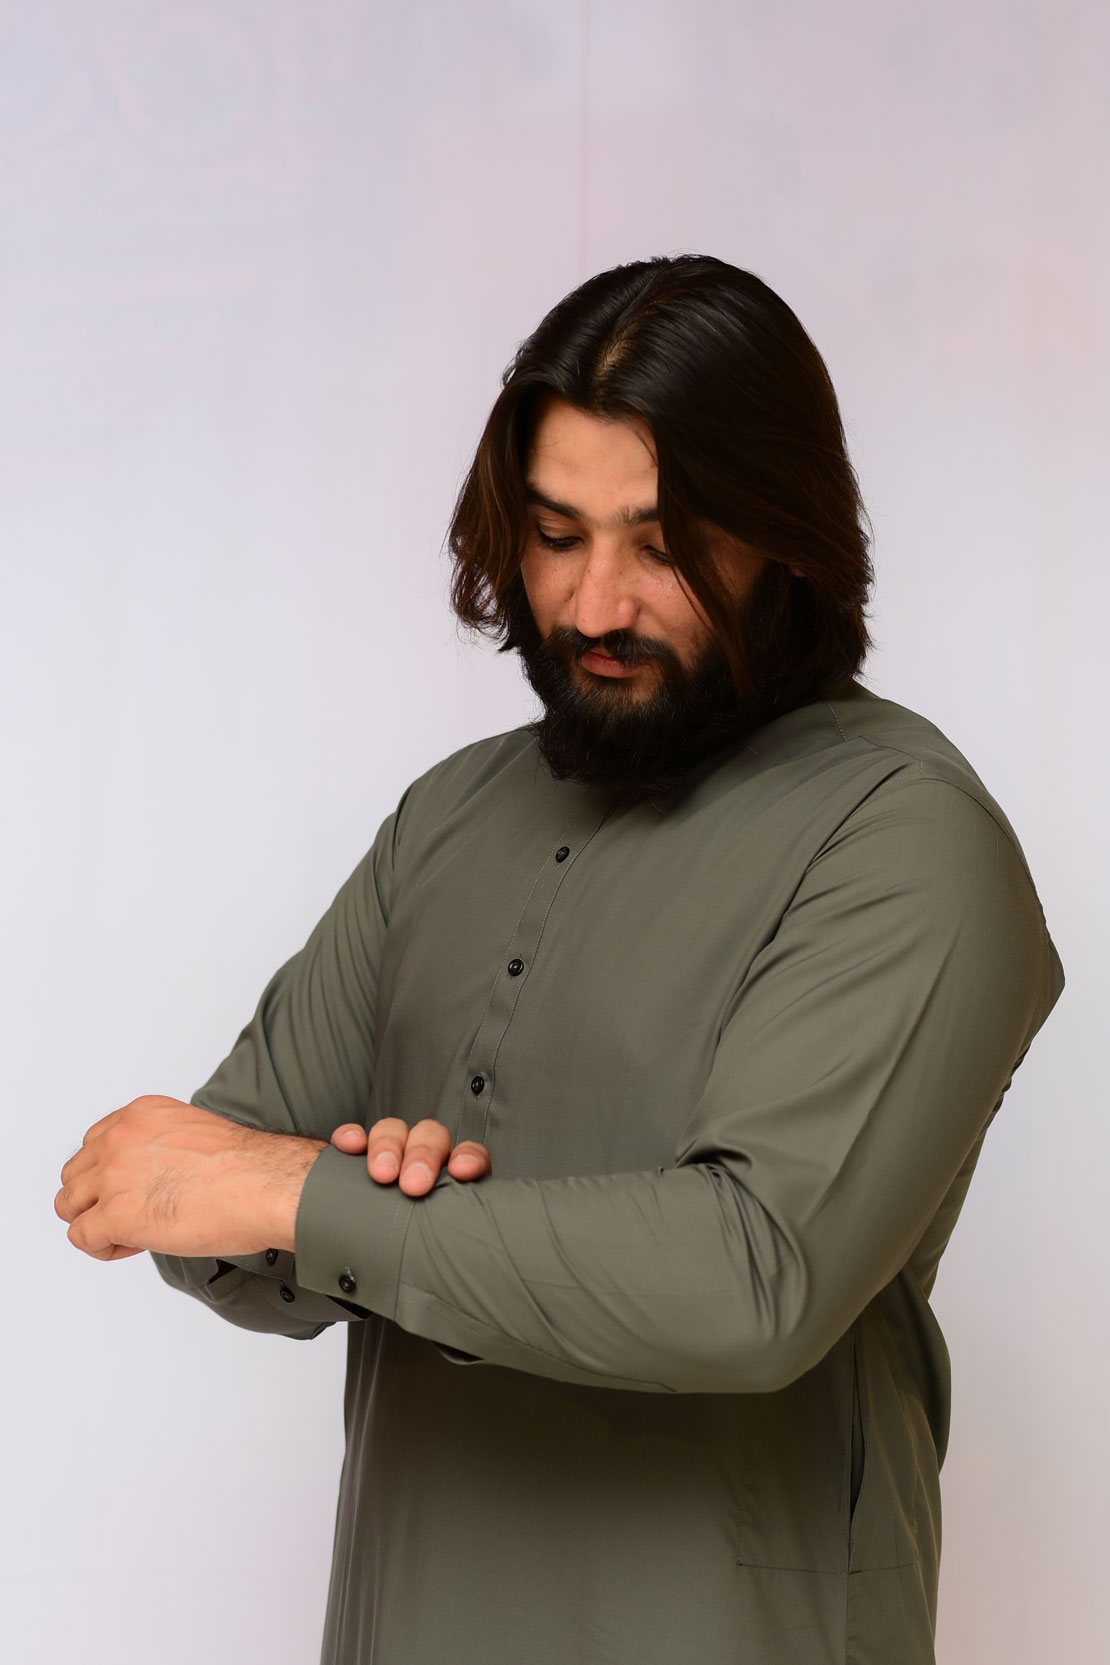 Indicot Men's Stitched Collection - Casual Cotton shalwar kameez